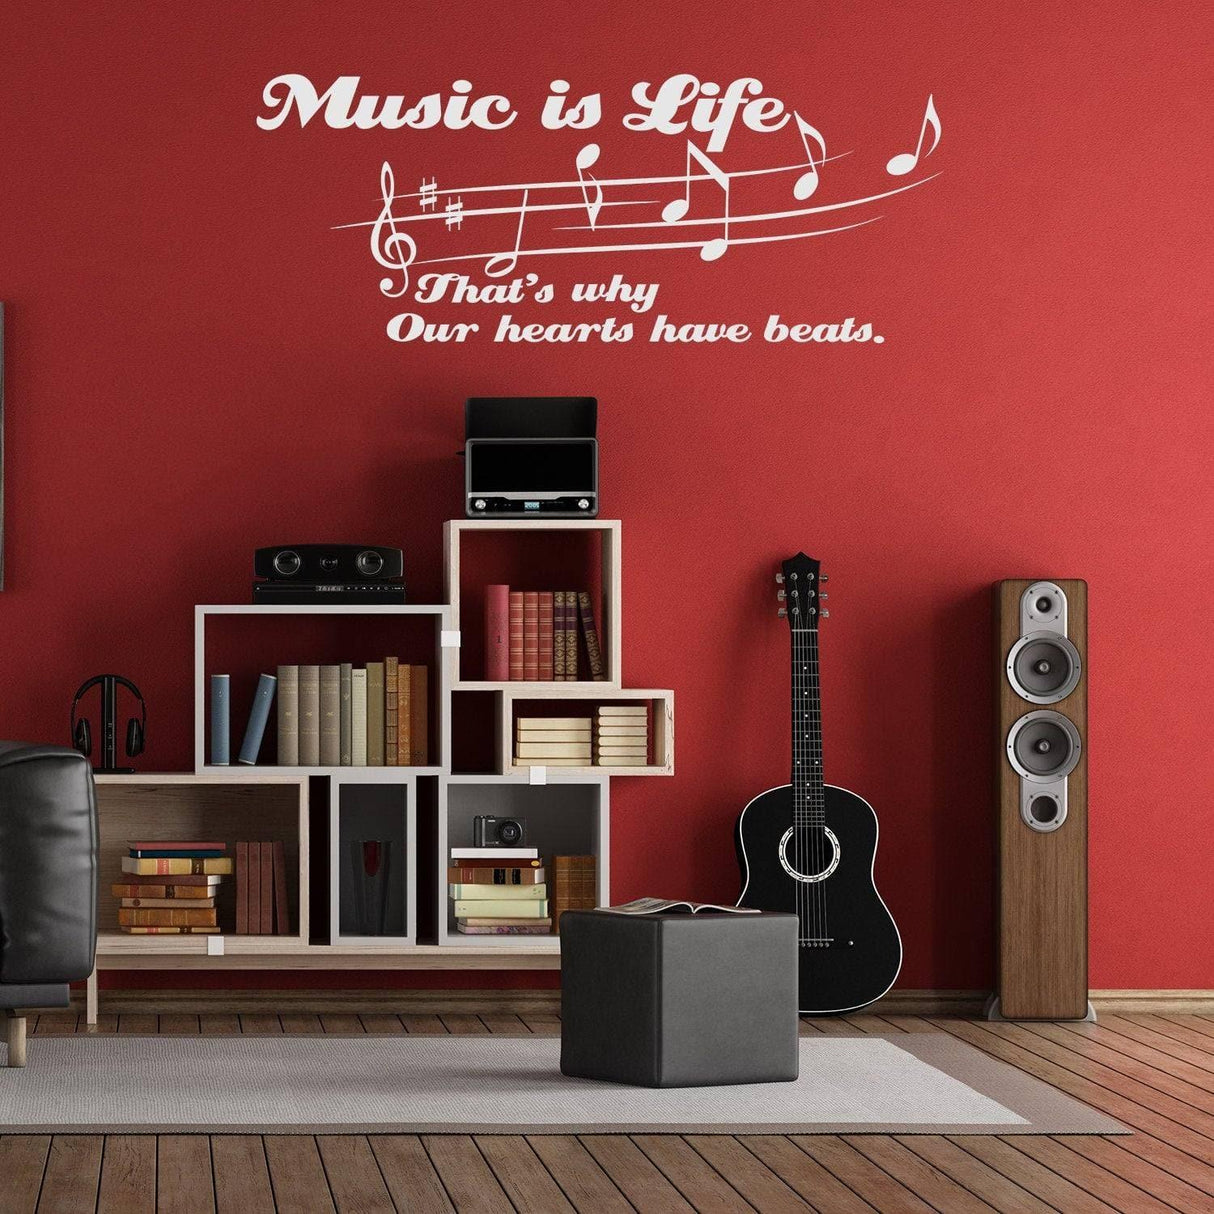 Music Is My Life Quote Wall Sticker - Art Decor Gift Note Notes Quotes Vinyl Decal - Room Inspirational Motivational Musical Saying Decals - Decords